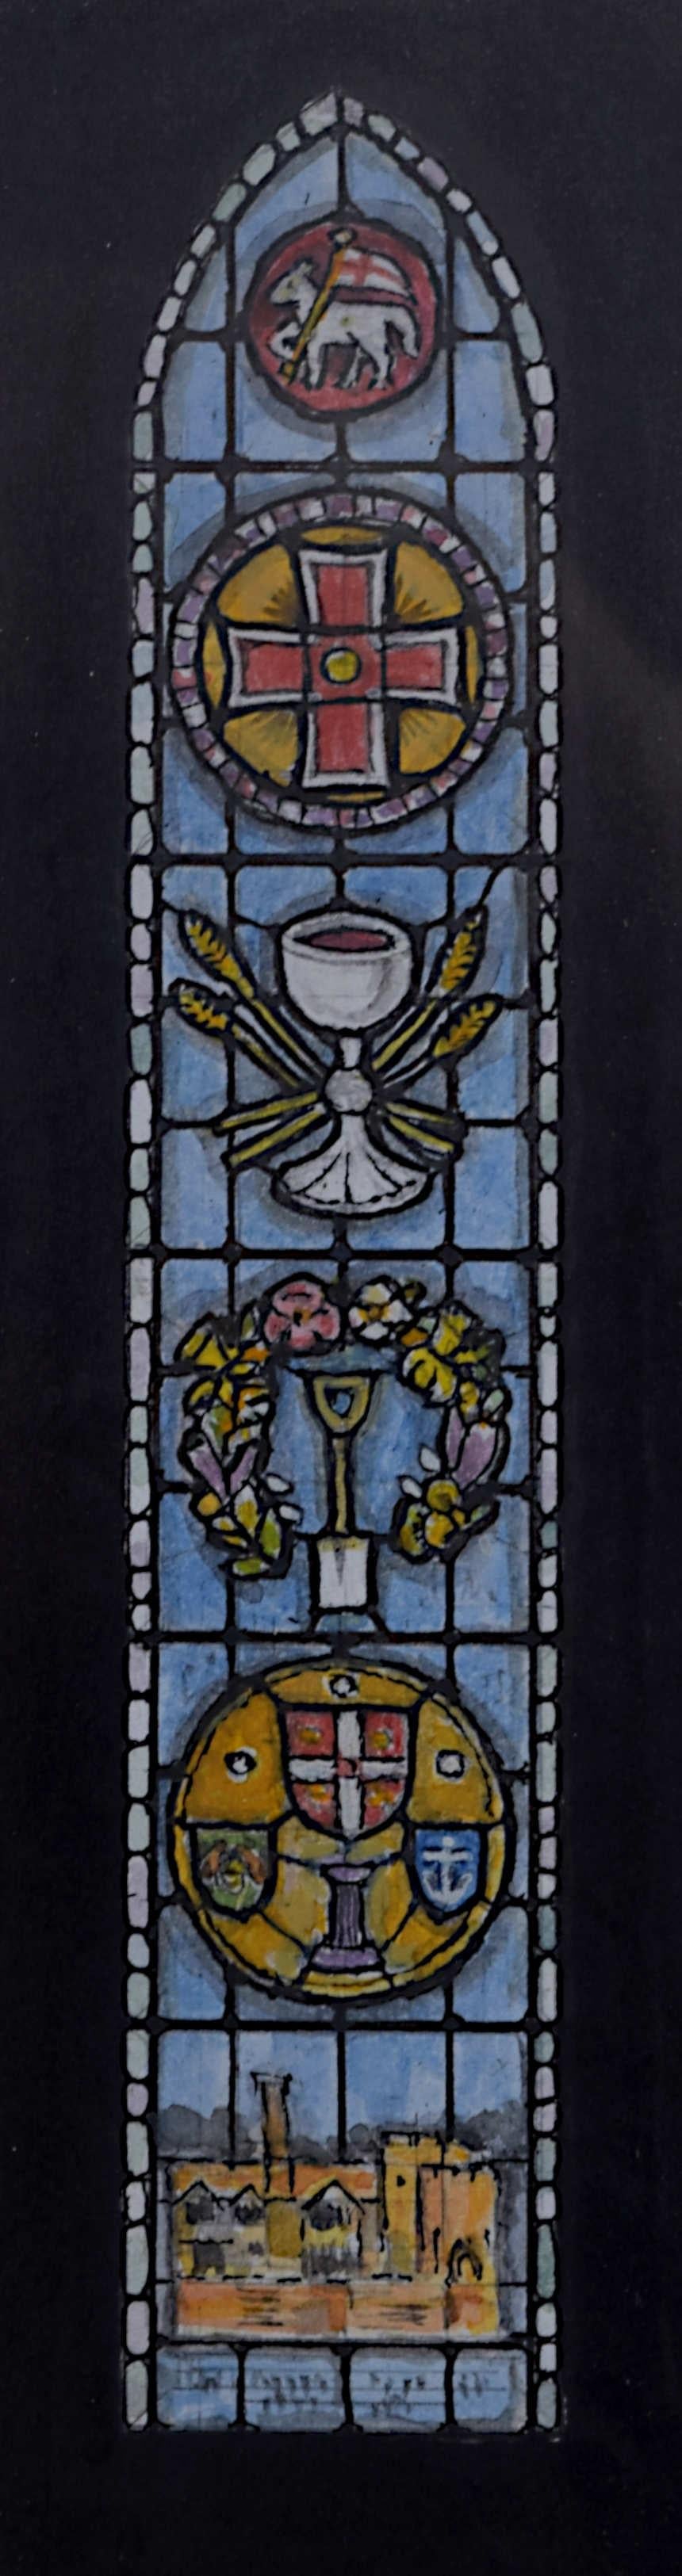 We acquired a series of watercolour stained glass designs from Jane Gray's studio. To find more scroll down to "More from this Seller" and below it click on "See all from this seller." 

Jane Gray (b.1931)
Stained Glass Design
Watercolour
17.5 x 5